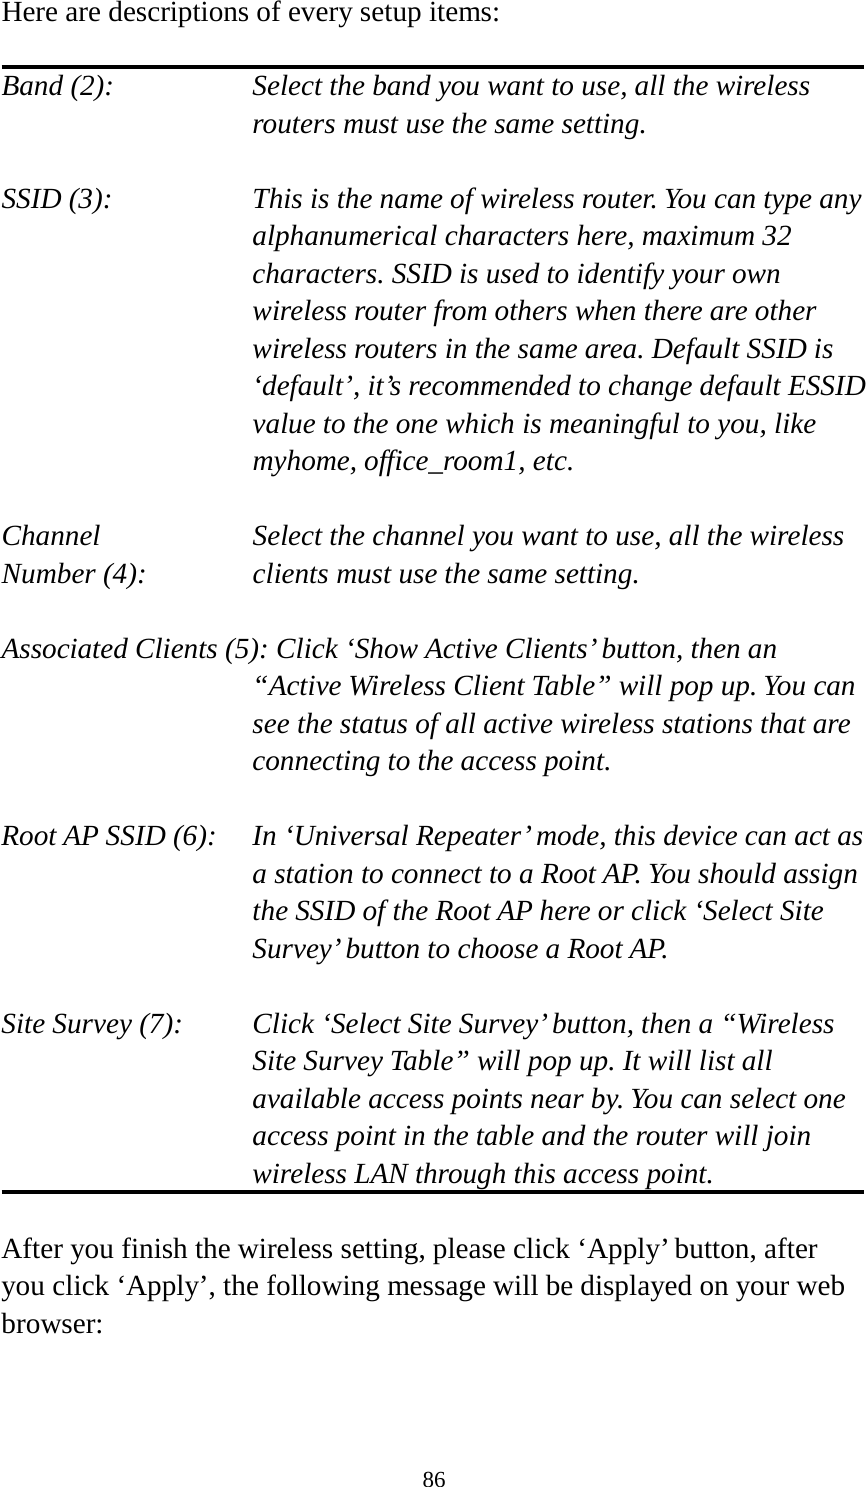 86 Here are descriptions of every setup items:  Band (2):  Select the band you want to use, all the wireless routers must use the same setting.  SSID (3):  This is the name of wireless router. You can type any alphanumerical characters here, maximum 32 characters. SSID is used to identify your own wireless router from others when there are other wireless routers in the same area. Default SSID is ‘default’, it’s recommended to change default ESSID value to the one which is meaningful to you, like myhome, office_room1, etc.  Channel Select the channel you want to use, all the wireless Number (4):  clients must use the same setting.  Associated Clients (5): Click ‘Show Active Clients’ button, then an “Active Wireless Client Table” will pop up. You can see the status of all active wireless stations that are connecting to the access point.  Root AP SSID (6):  In ‘Universal Repeater’ mode, this device can act as a station to connect to a Root AP. You should assign the SSID of the Root AP here or click ‘Select Site Survey’ button to choose a Root AP.  Site Survey (7):  Click ‘Select Site Survey’ button, then a “Wireless Site Survey Table” will pop up. It will list all available access points near by. You can select one access point in the table and the router will join wireless LAN through this access point.  After you finish the wireless setting, please click ‘Apply’ button, after you click ‘Apply’, the following message will be displayed on your web browser:  